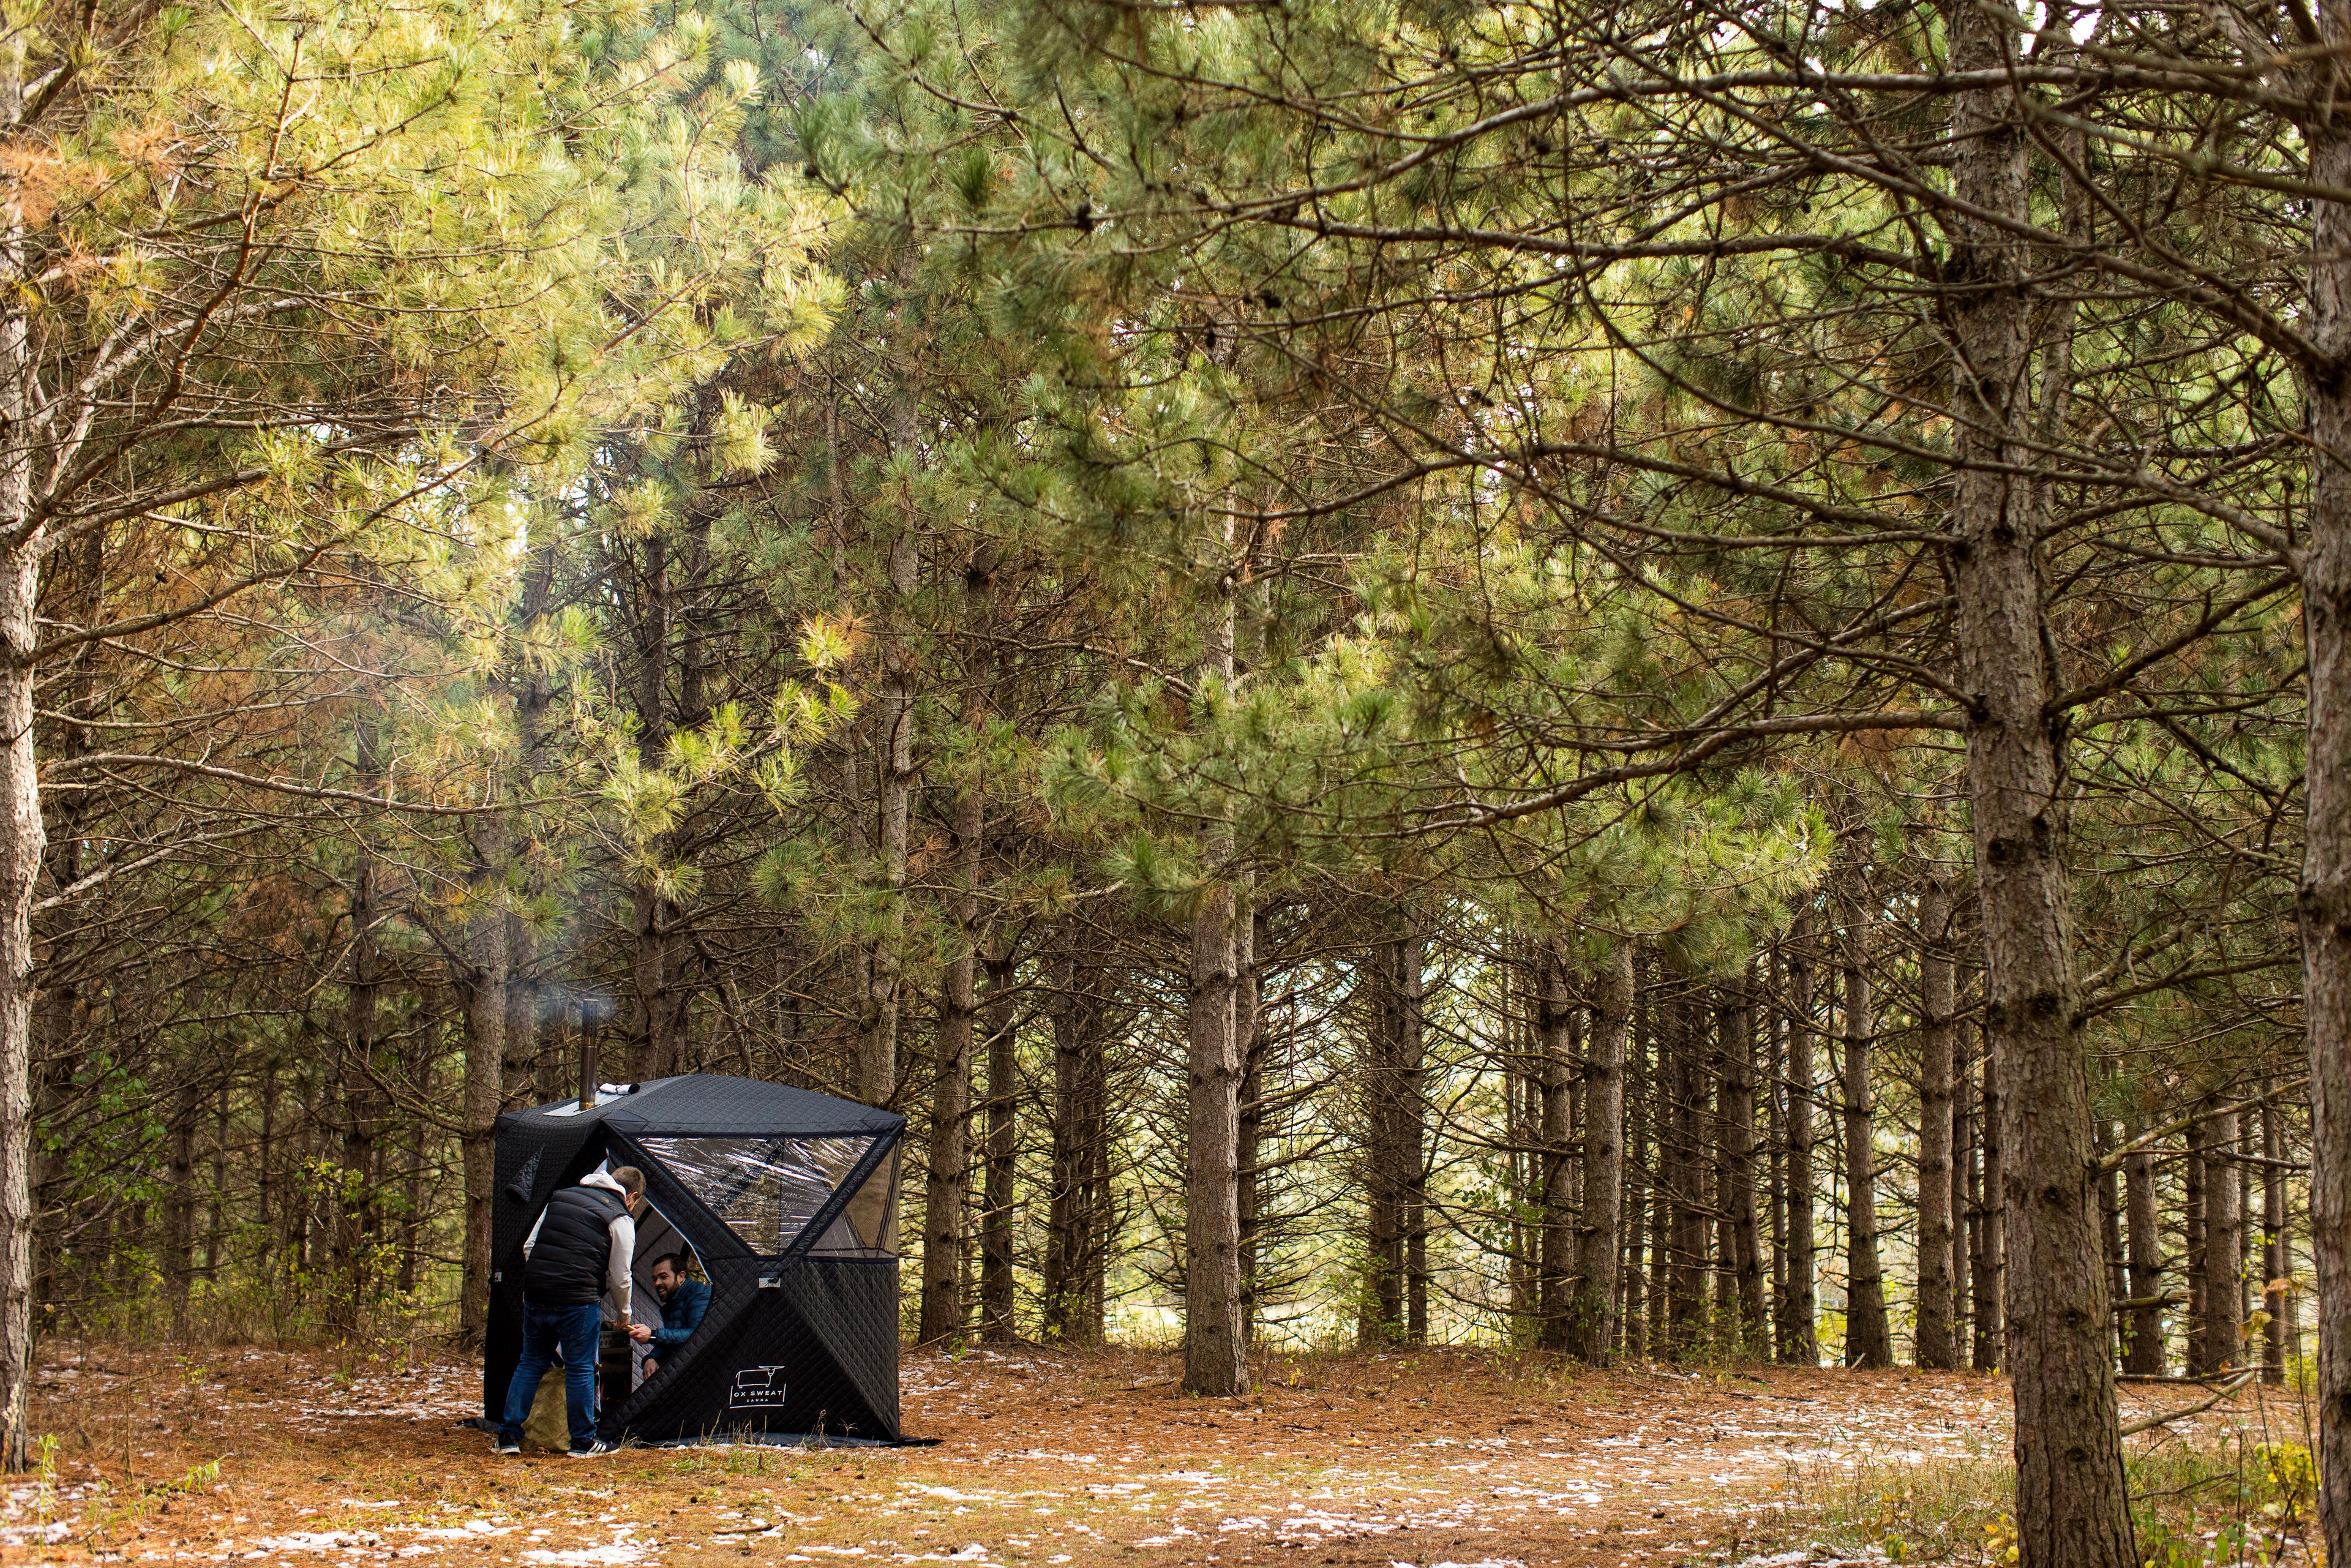 Sauna Tent Effective Use in pine trees, reviewing how well oak works